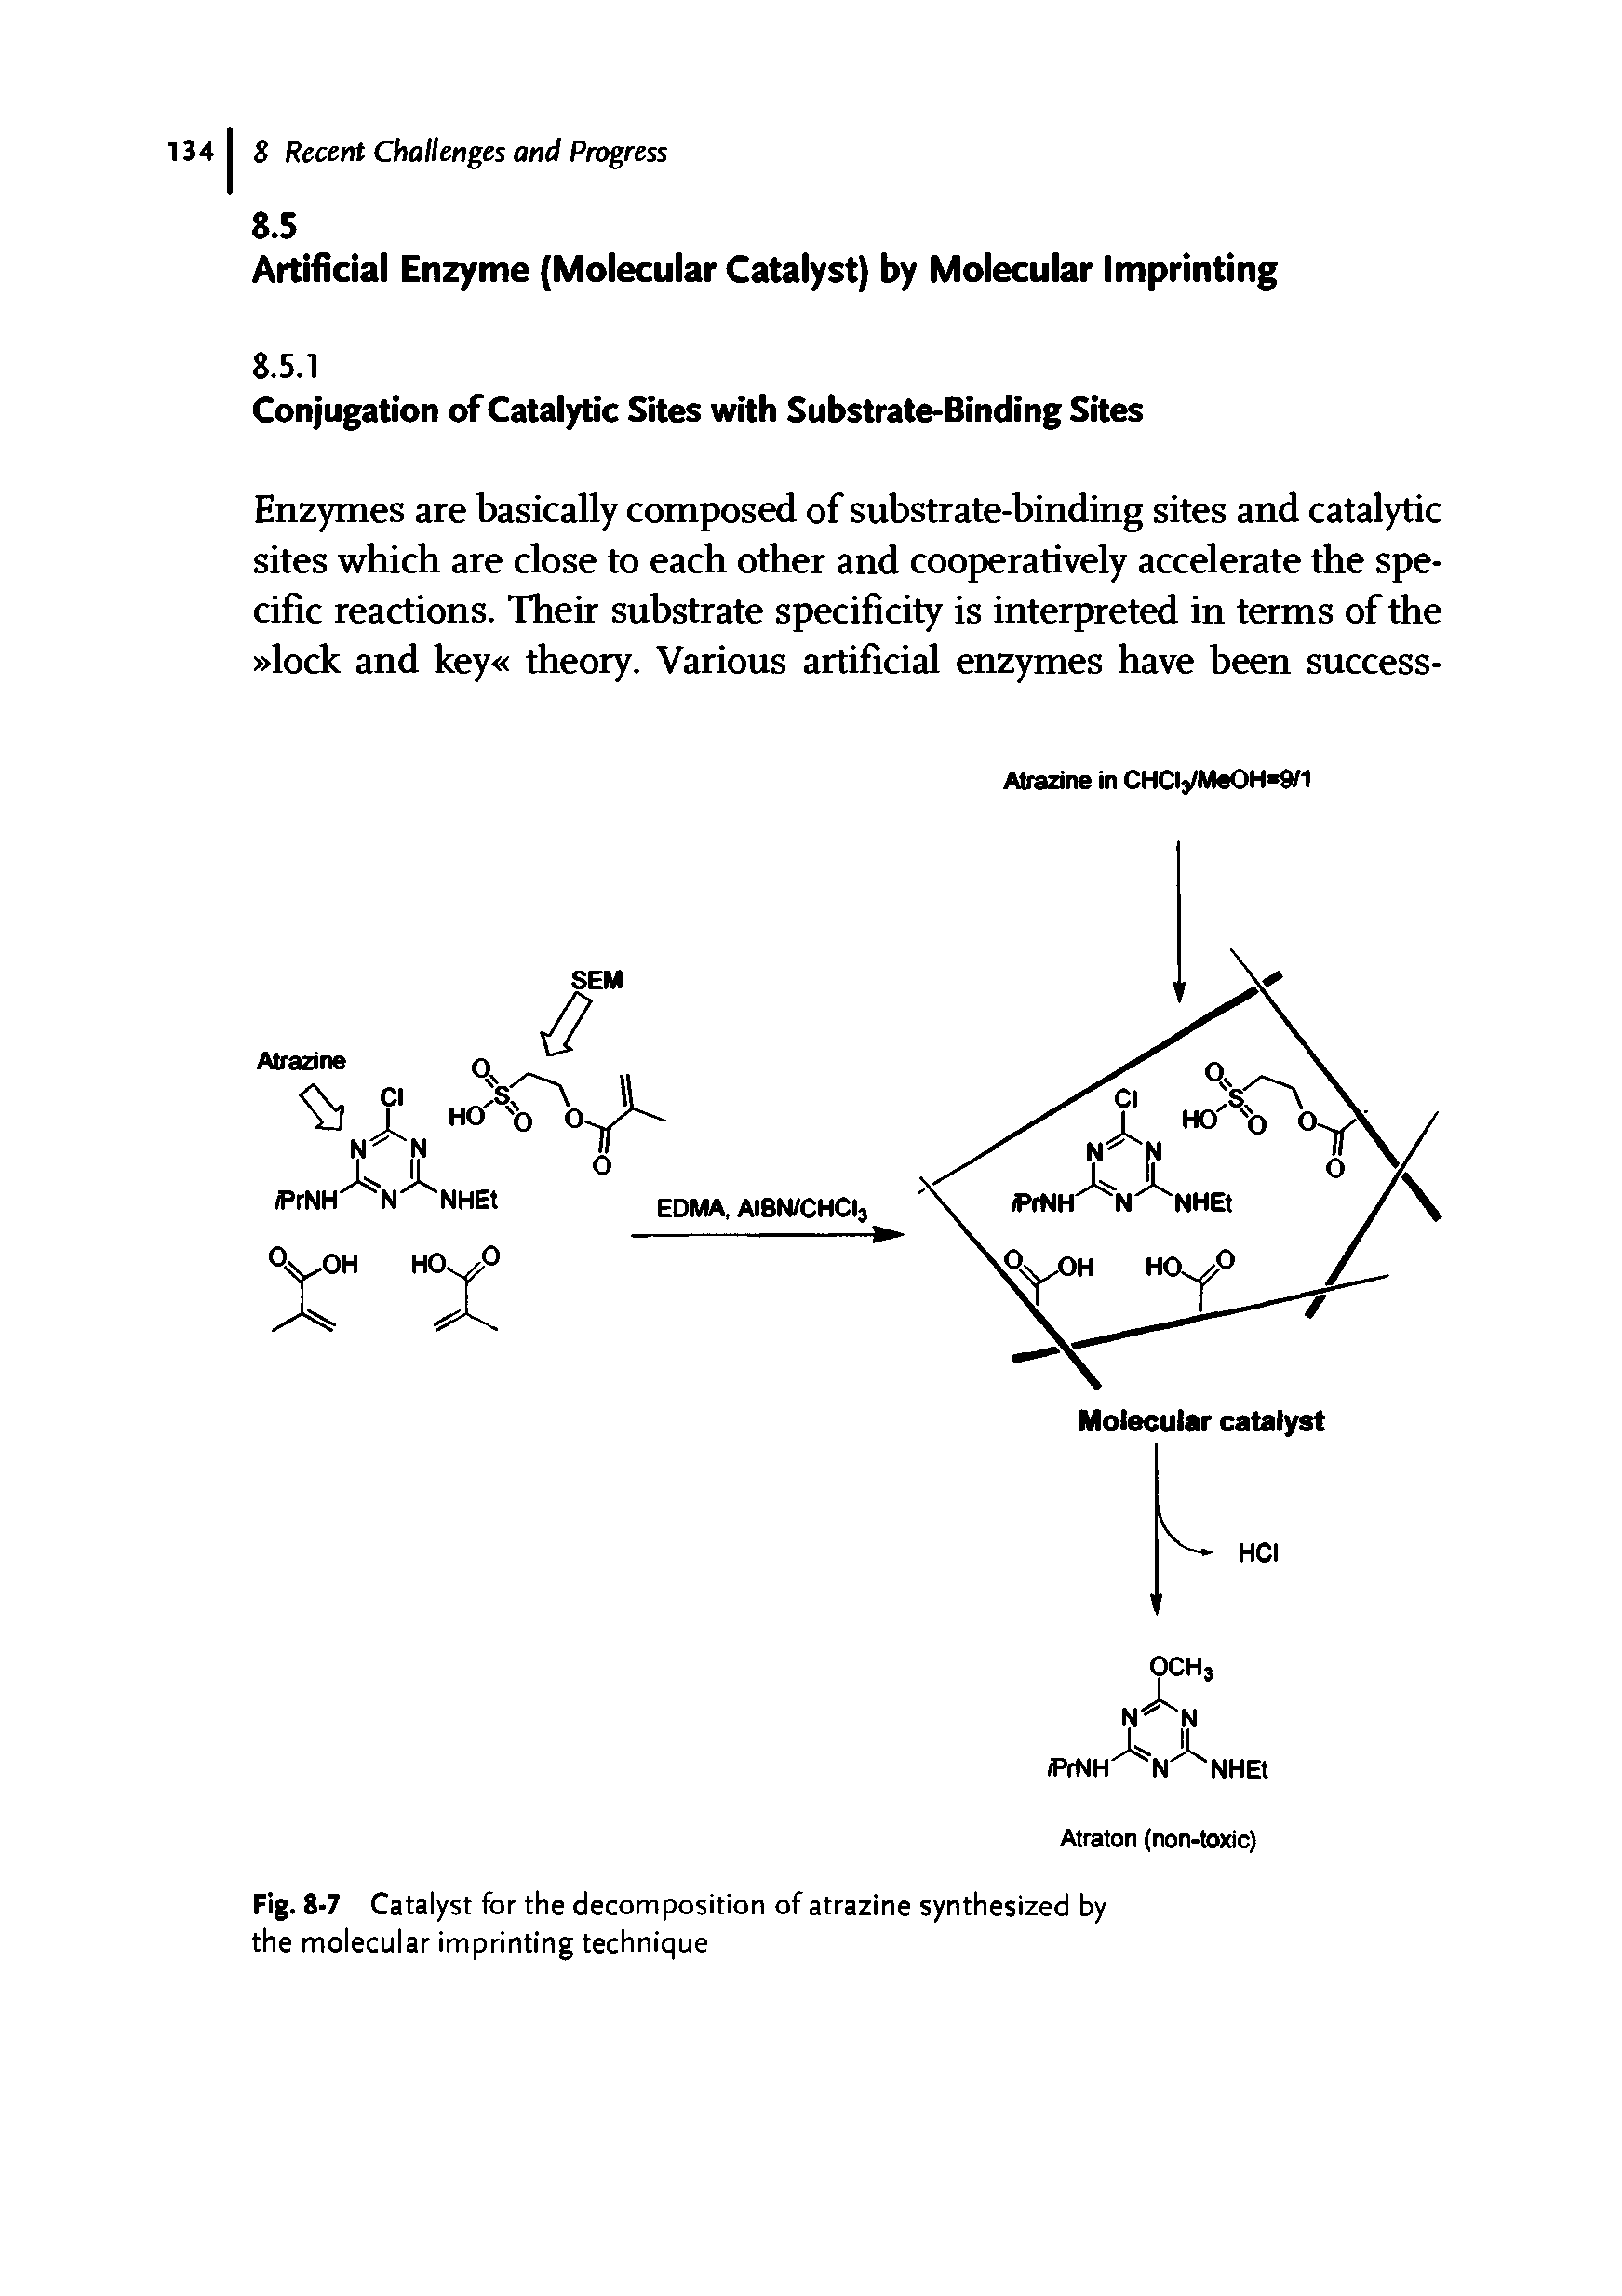 Fig. 8-7 Catalyst for the decomposition of atrazine synthesized by the molecular imprinting technique...